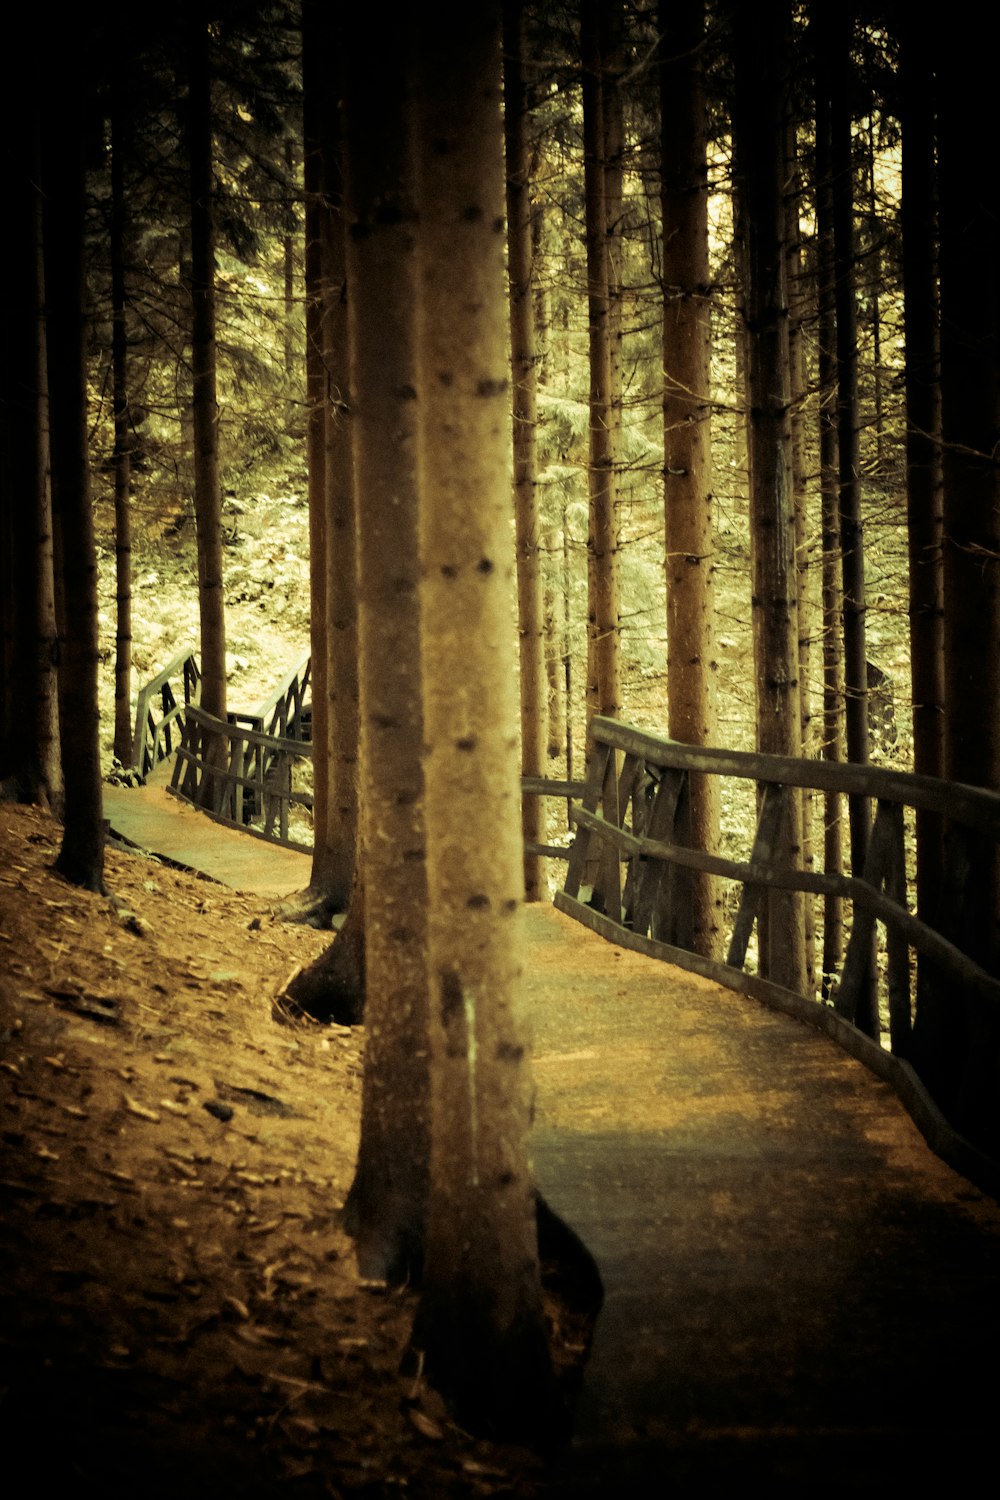 a wooden walkway in a forest with trees